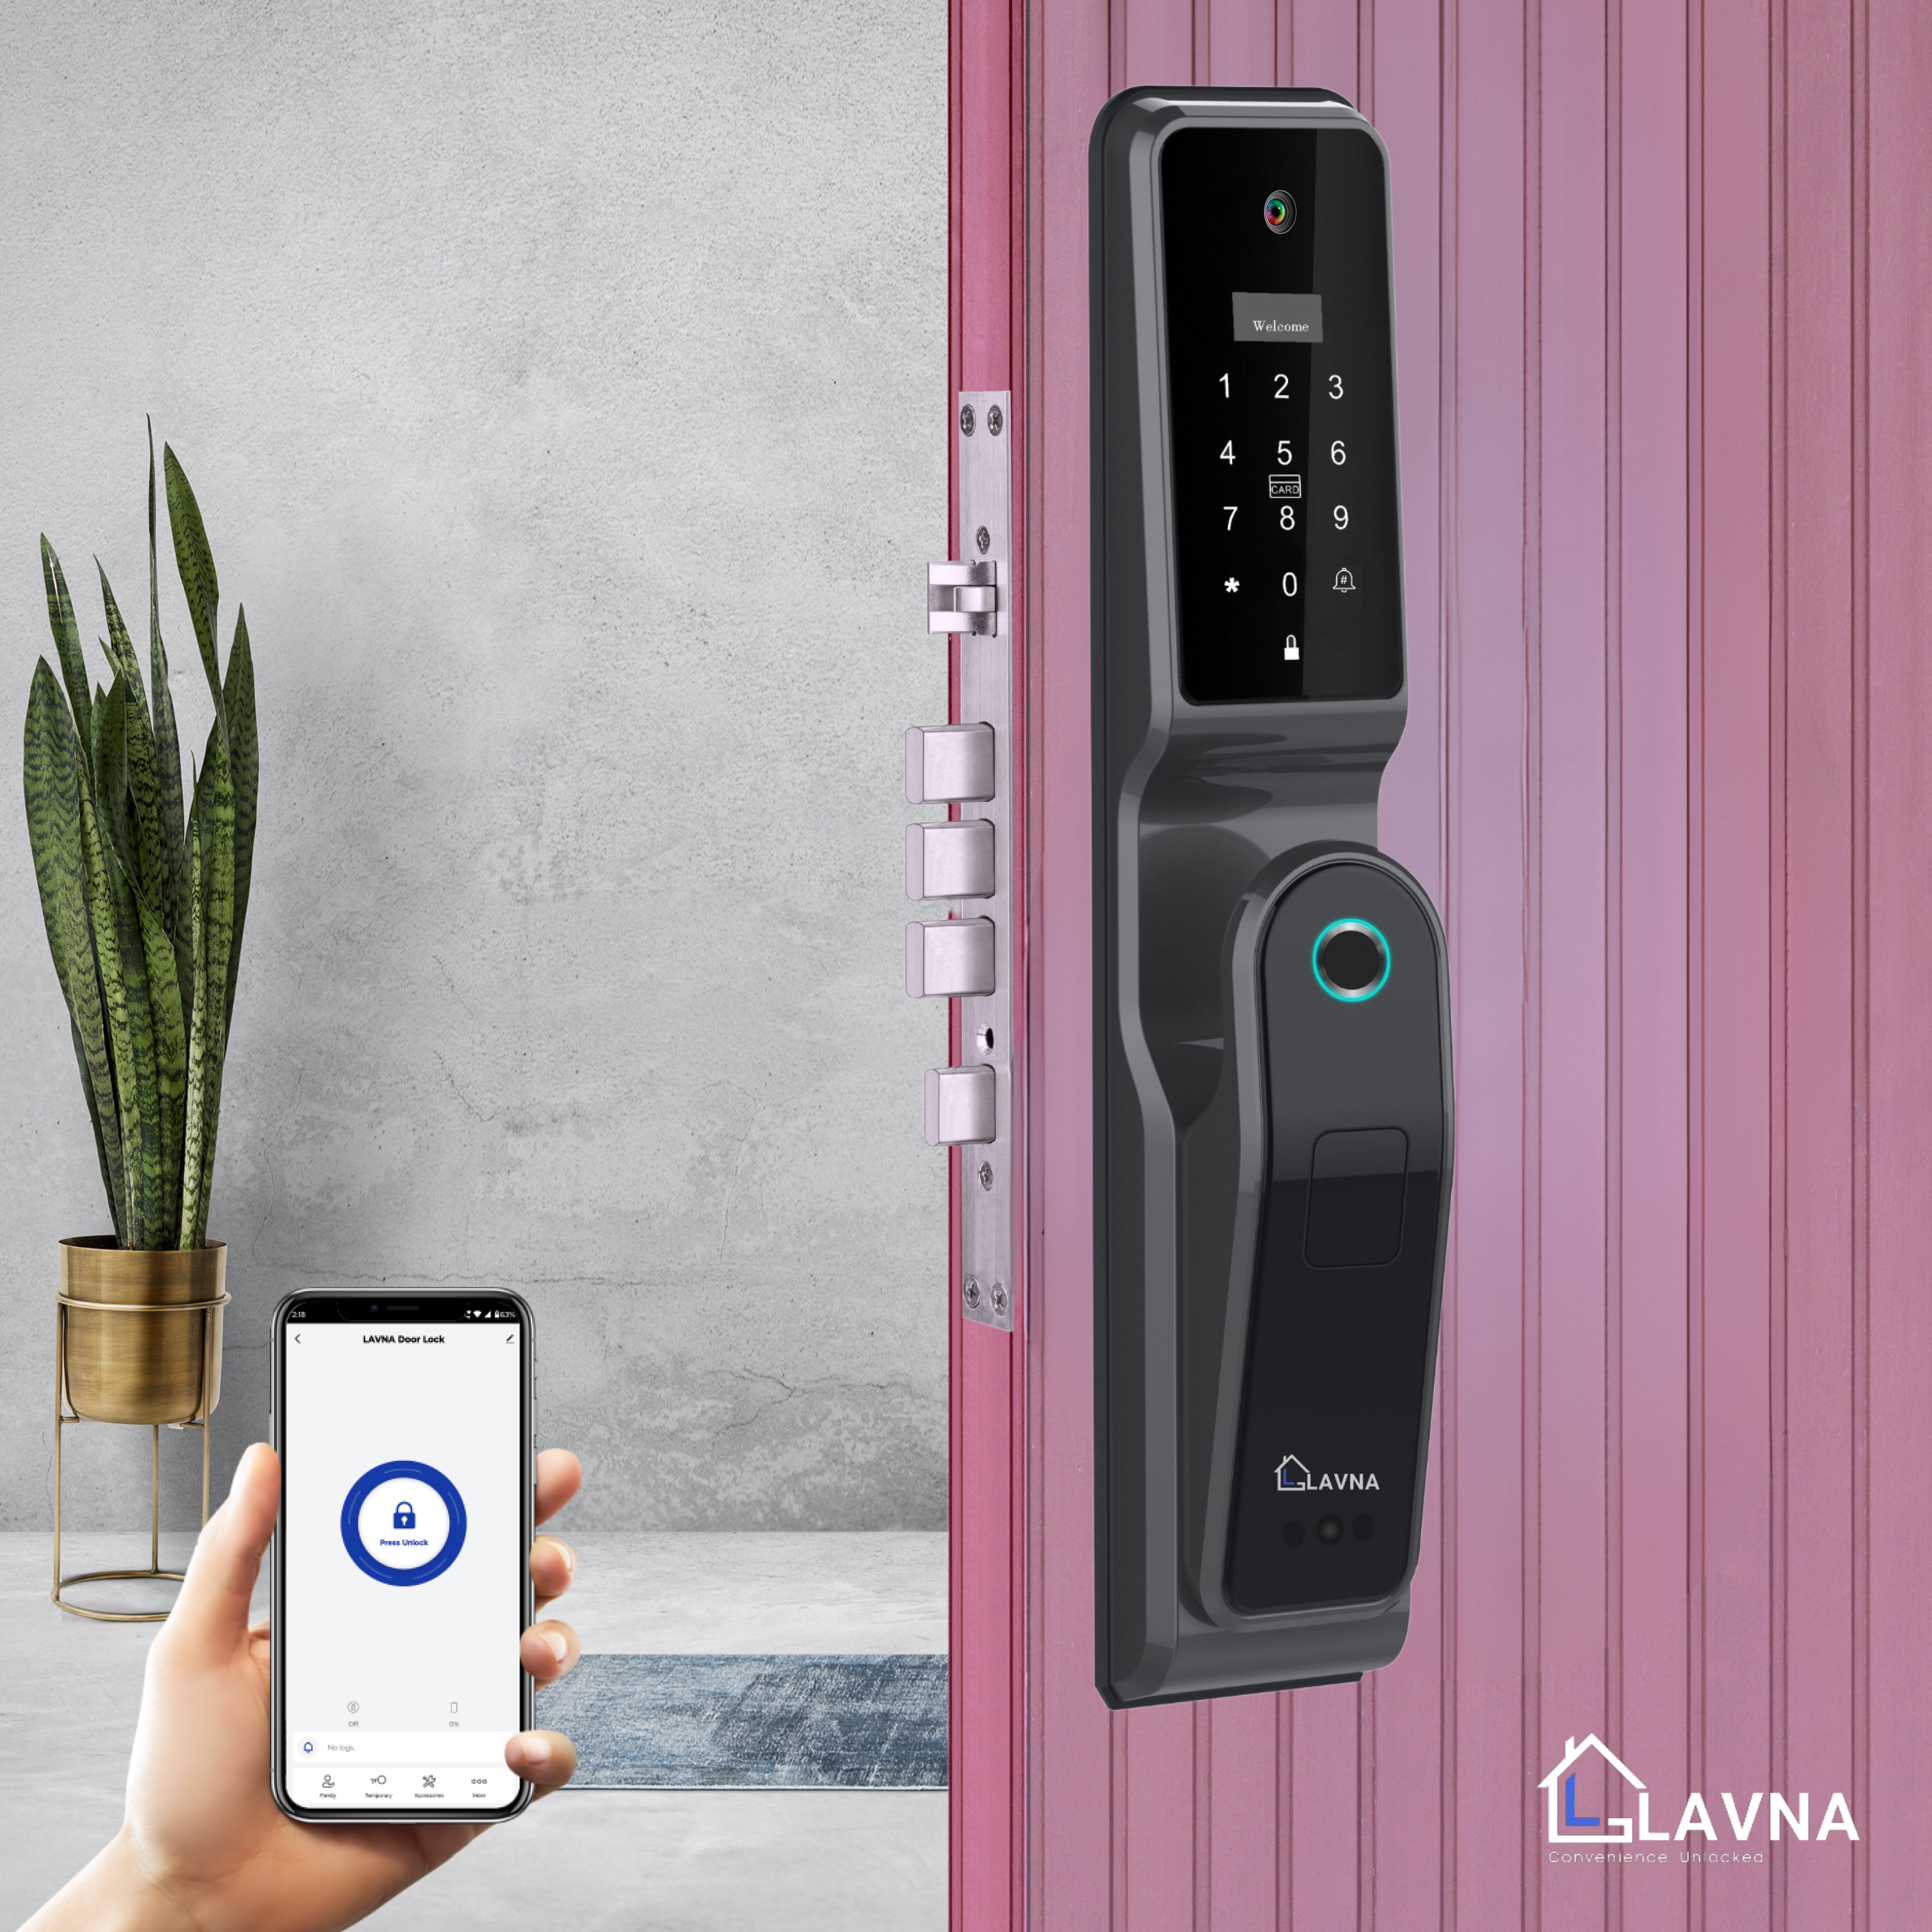 LAVNA Smart Automatic Camera Door Lock with Fingerprint, WiFi, Mobile App, OTP, PIN, RFID Card and Manual Key Access for Wooden Doors (LA44 with Camera)